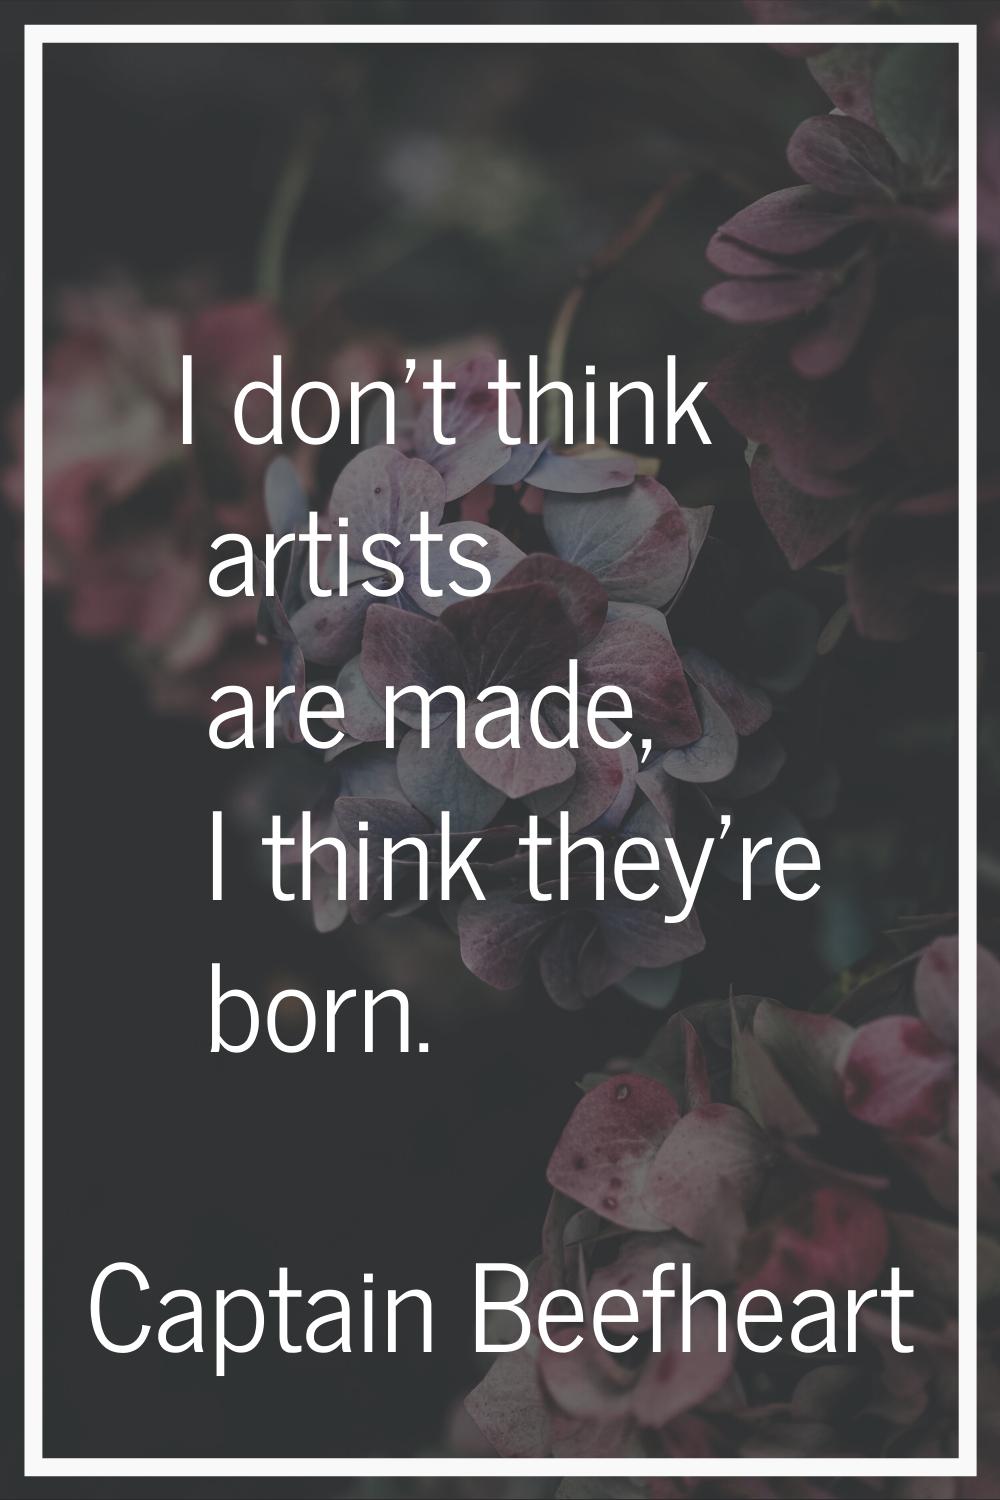 I don't think artists are made, I think they're born.